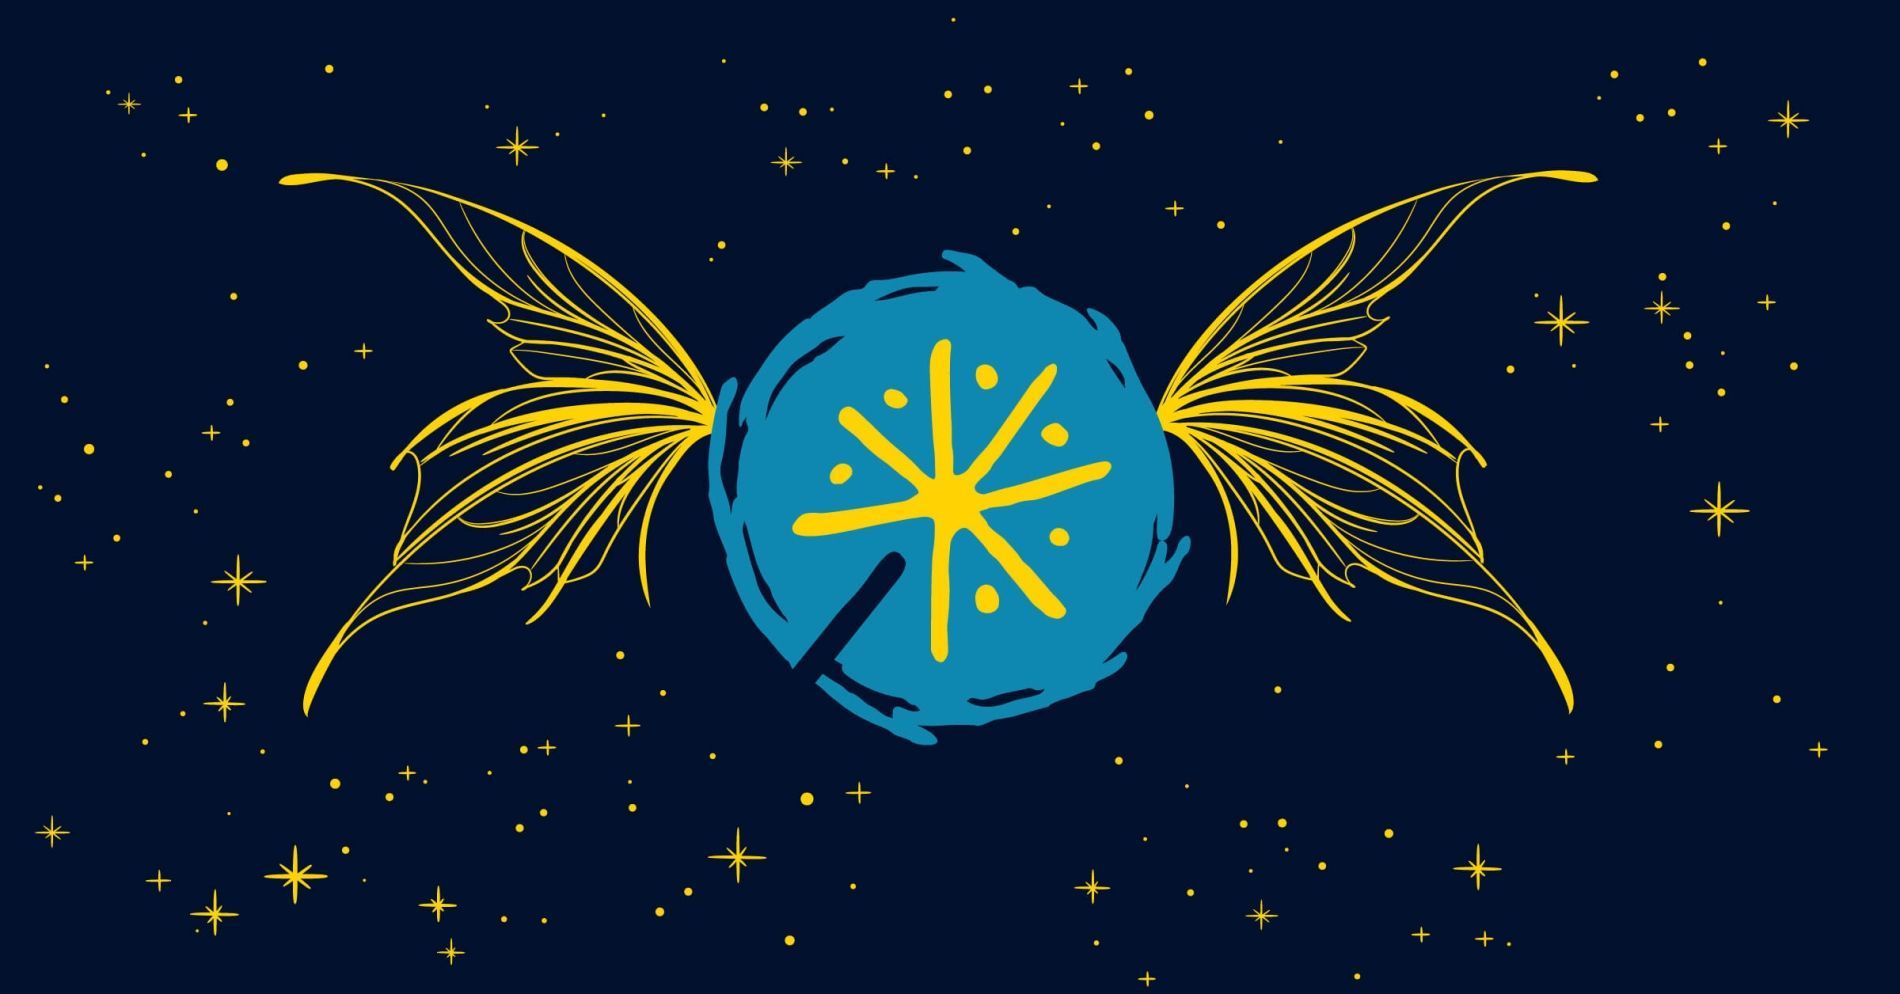 A graphic of a Tinkerbell-like fairy with wings flying through a starry sky - Tinkerbell